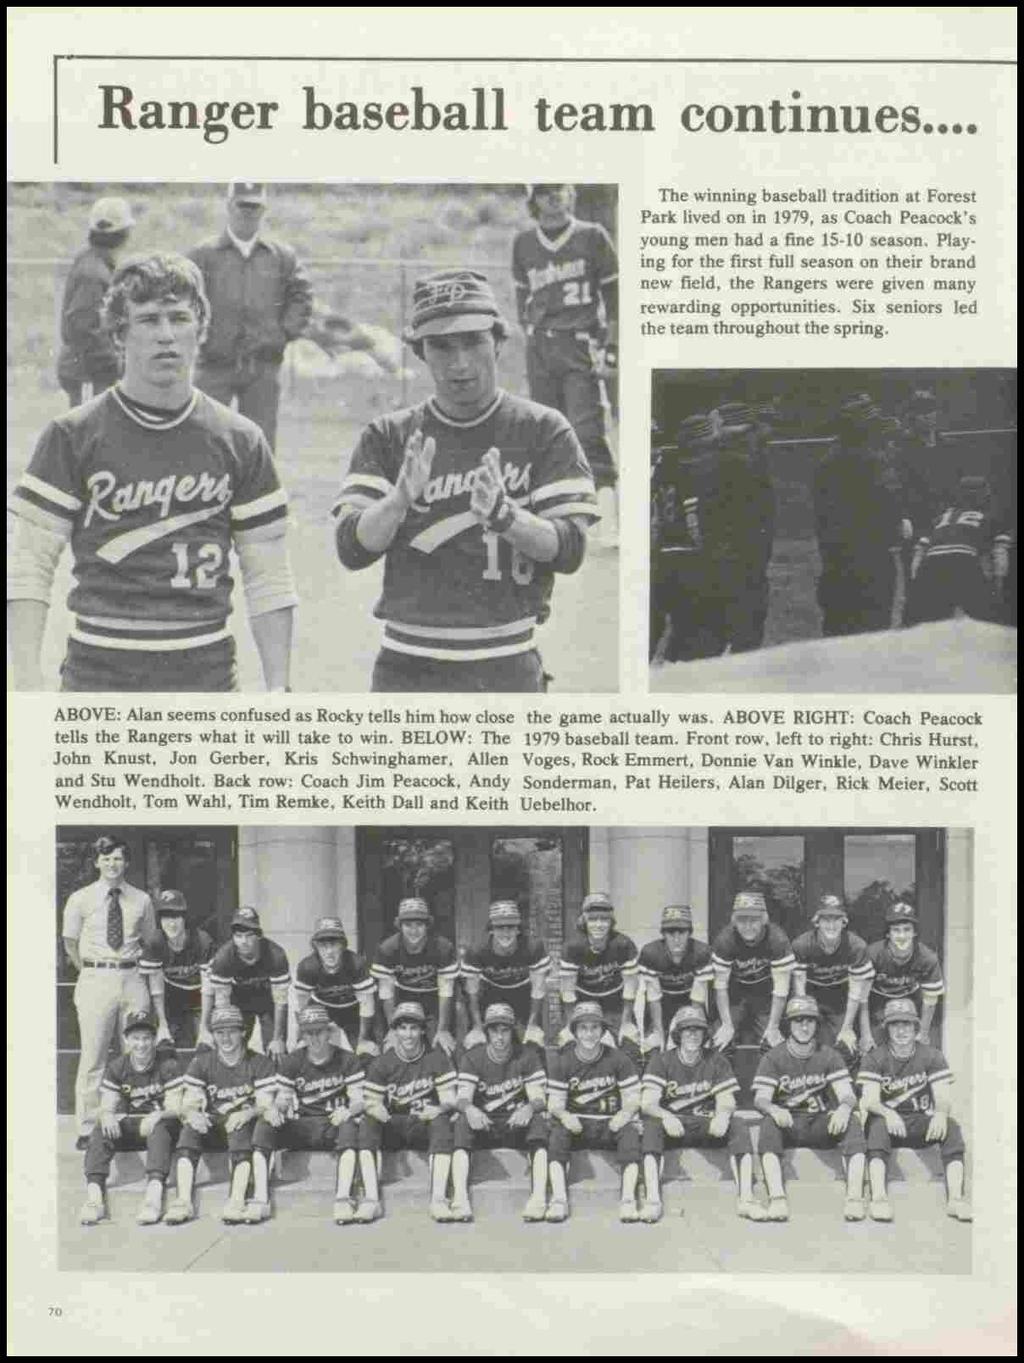 Ranger baseball team continues... The winning baseball tradition at Forest Park lived on in 1979, as Coach Peacock's young men had a fine 15-10 season.